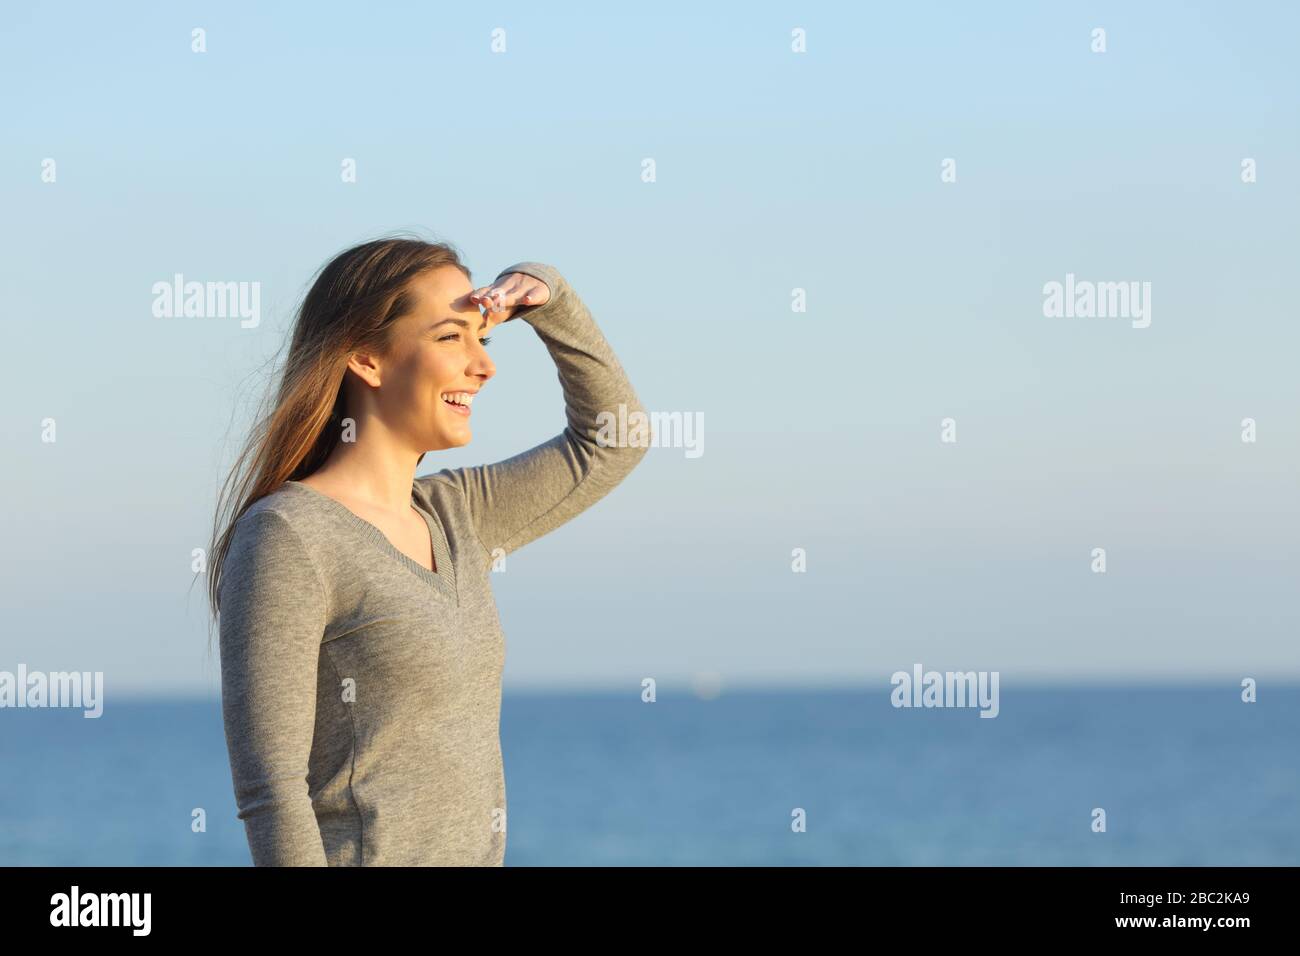 Happy woman searching looking at horizon on the beach with hand on forehead Stock Photo